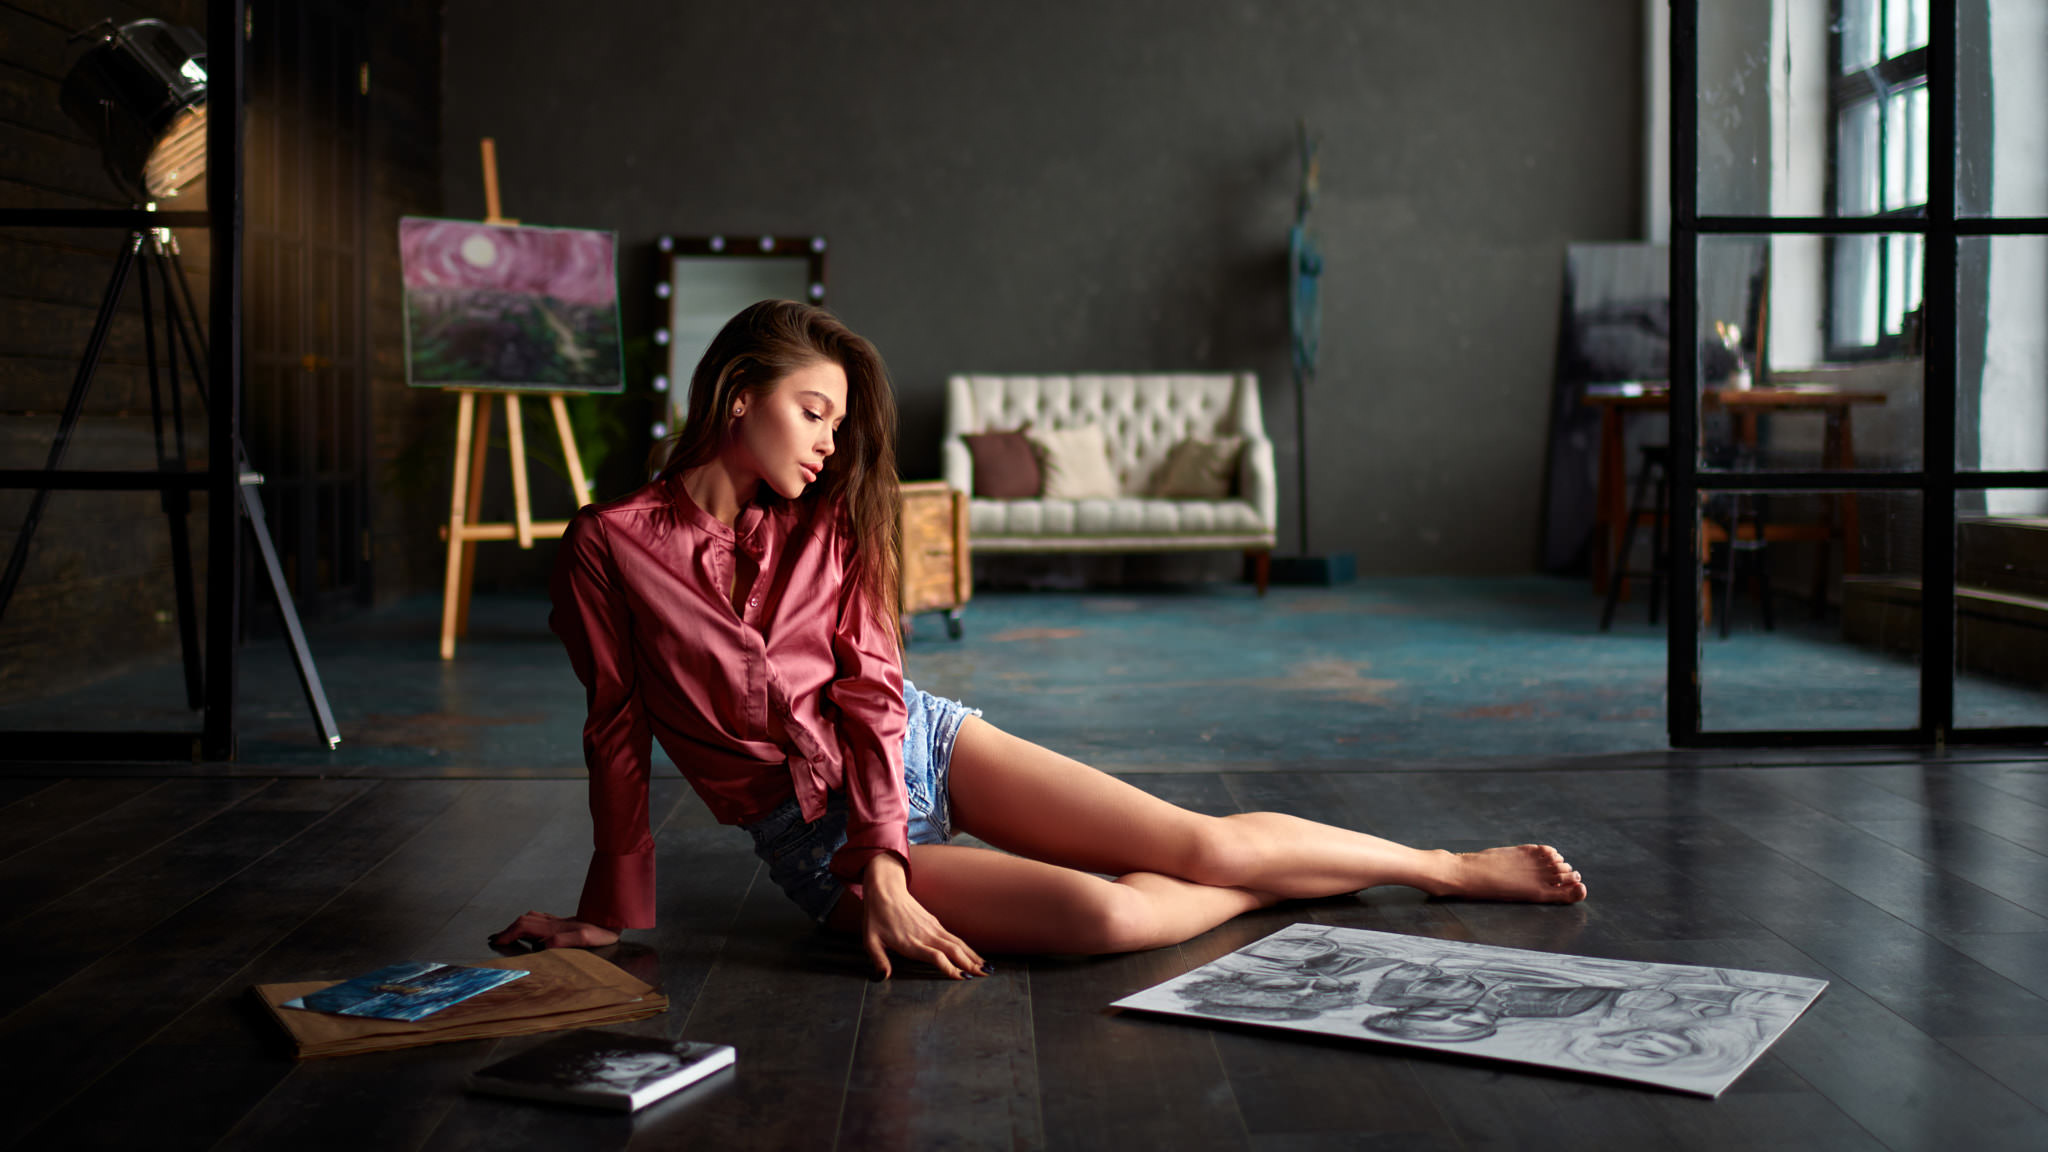 People 2048x1152 women jean shorts easel sitting on the floor painting shirt painted nails barefoot brunette